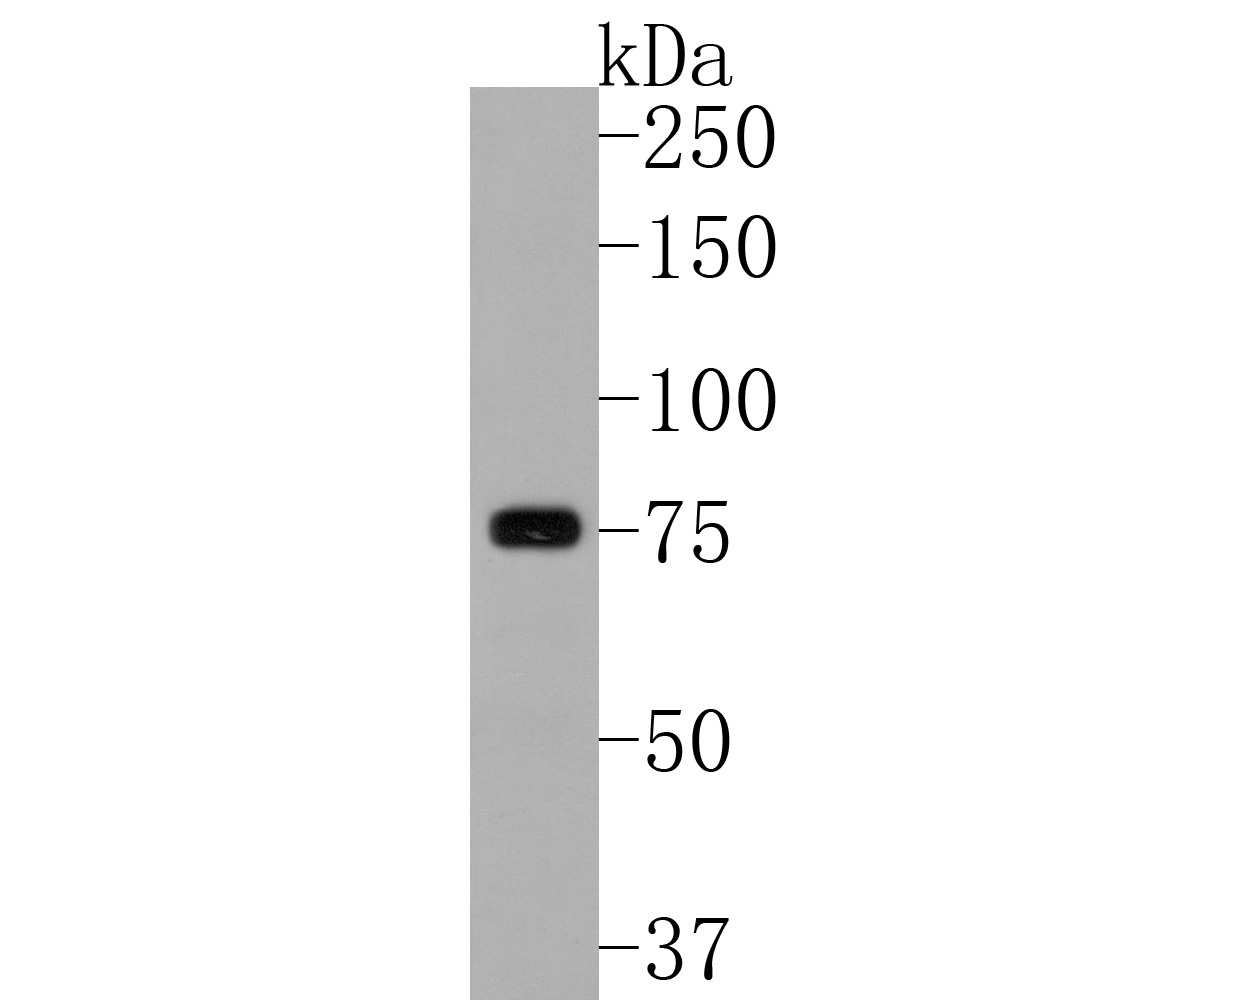 Western blot analysis of TUG on rat testis tissue lysates. Proteins were transferred to a PVDF membrane and blocked with 5% BSA in PBS for 1 hour at room temperature. The primary antibody (HA720029, 1/500) was used in 5% BSA at room temperature for 2 hours. Goat Anti-Rabbit IgG - HRP Secondary Antibody (HA1001) at 1:200,000 dilution was used for 1 hour at room temperature.